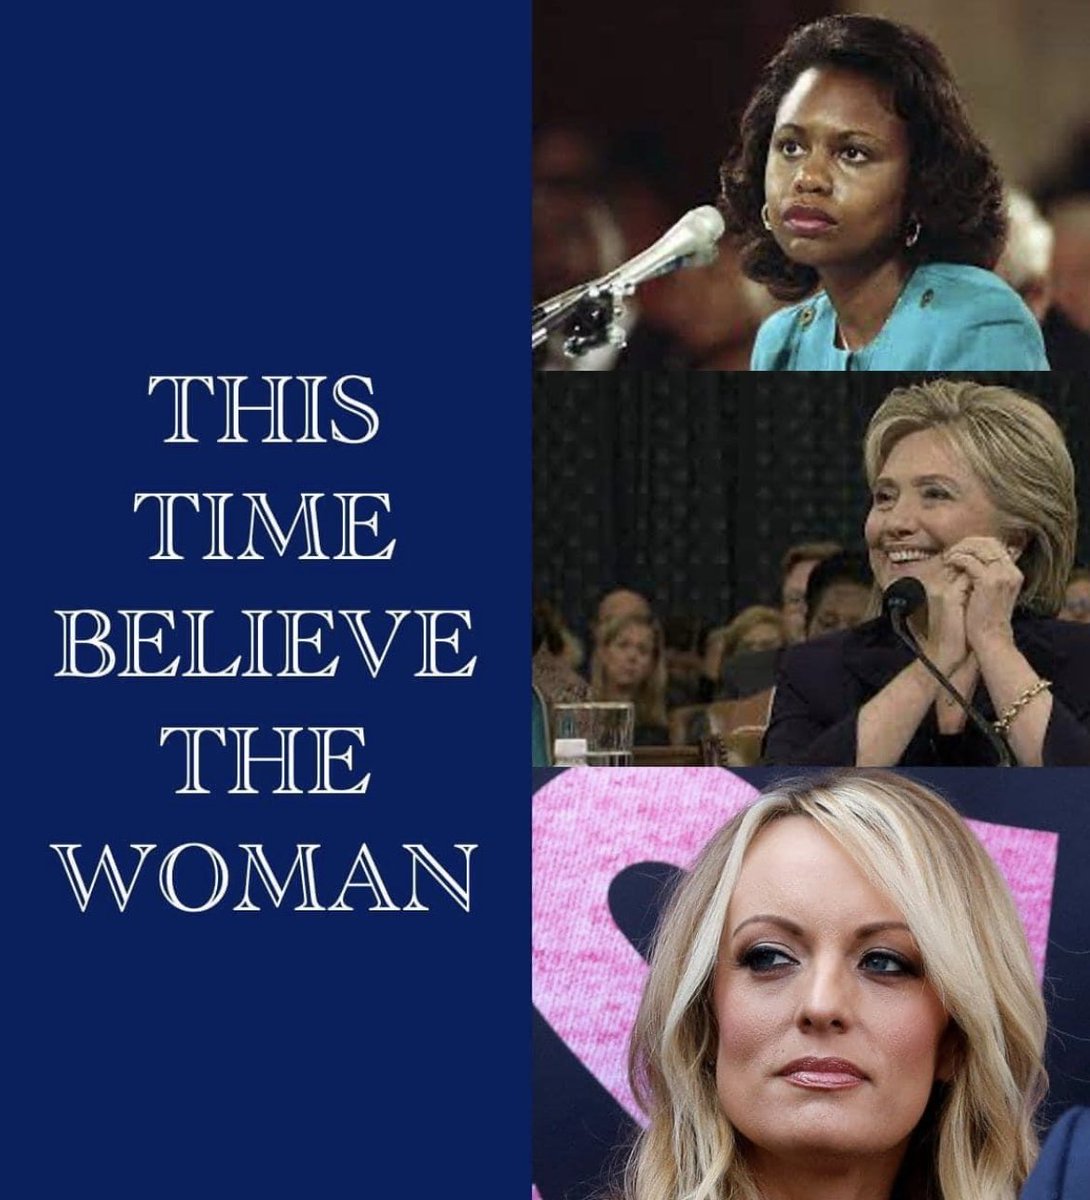 Seriously, believe the woman.